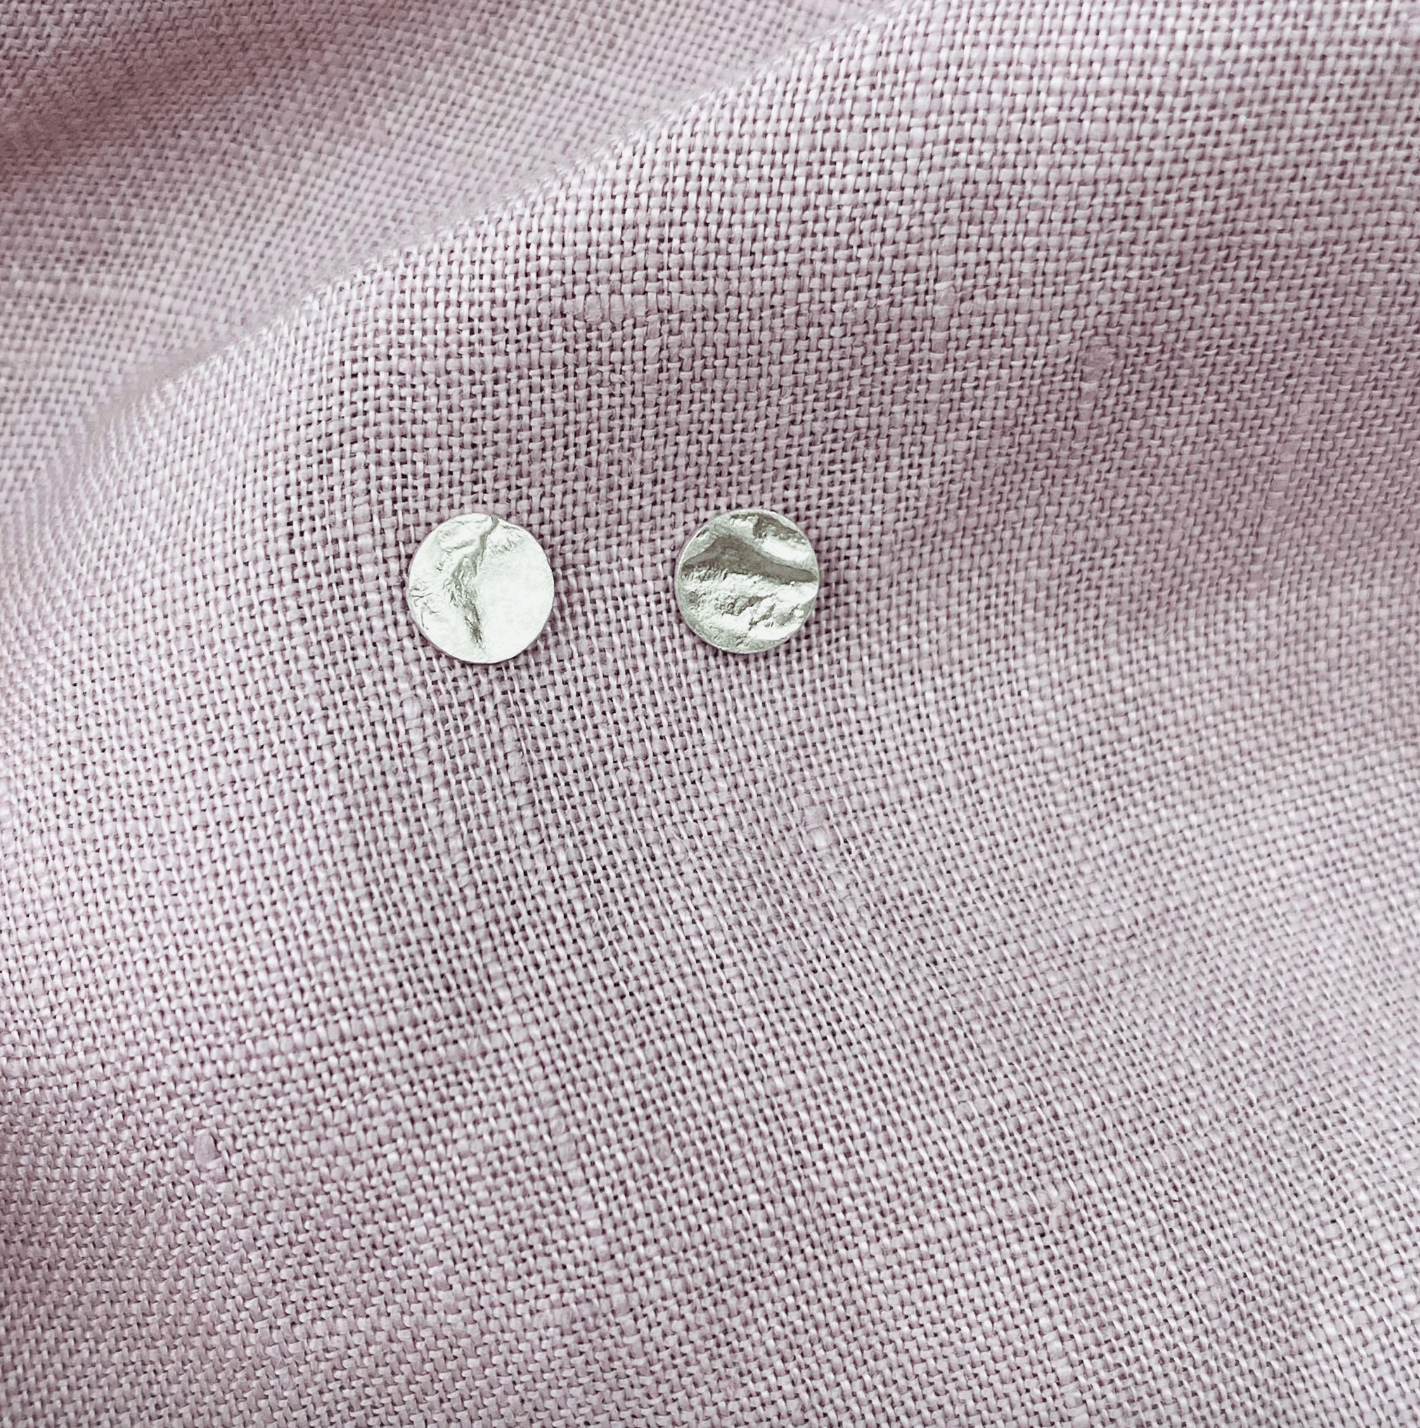 Lucy Lane Jewellery Earrings Small Moon Studs - Recycled Silver